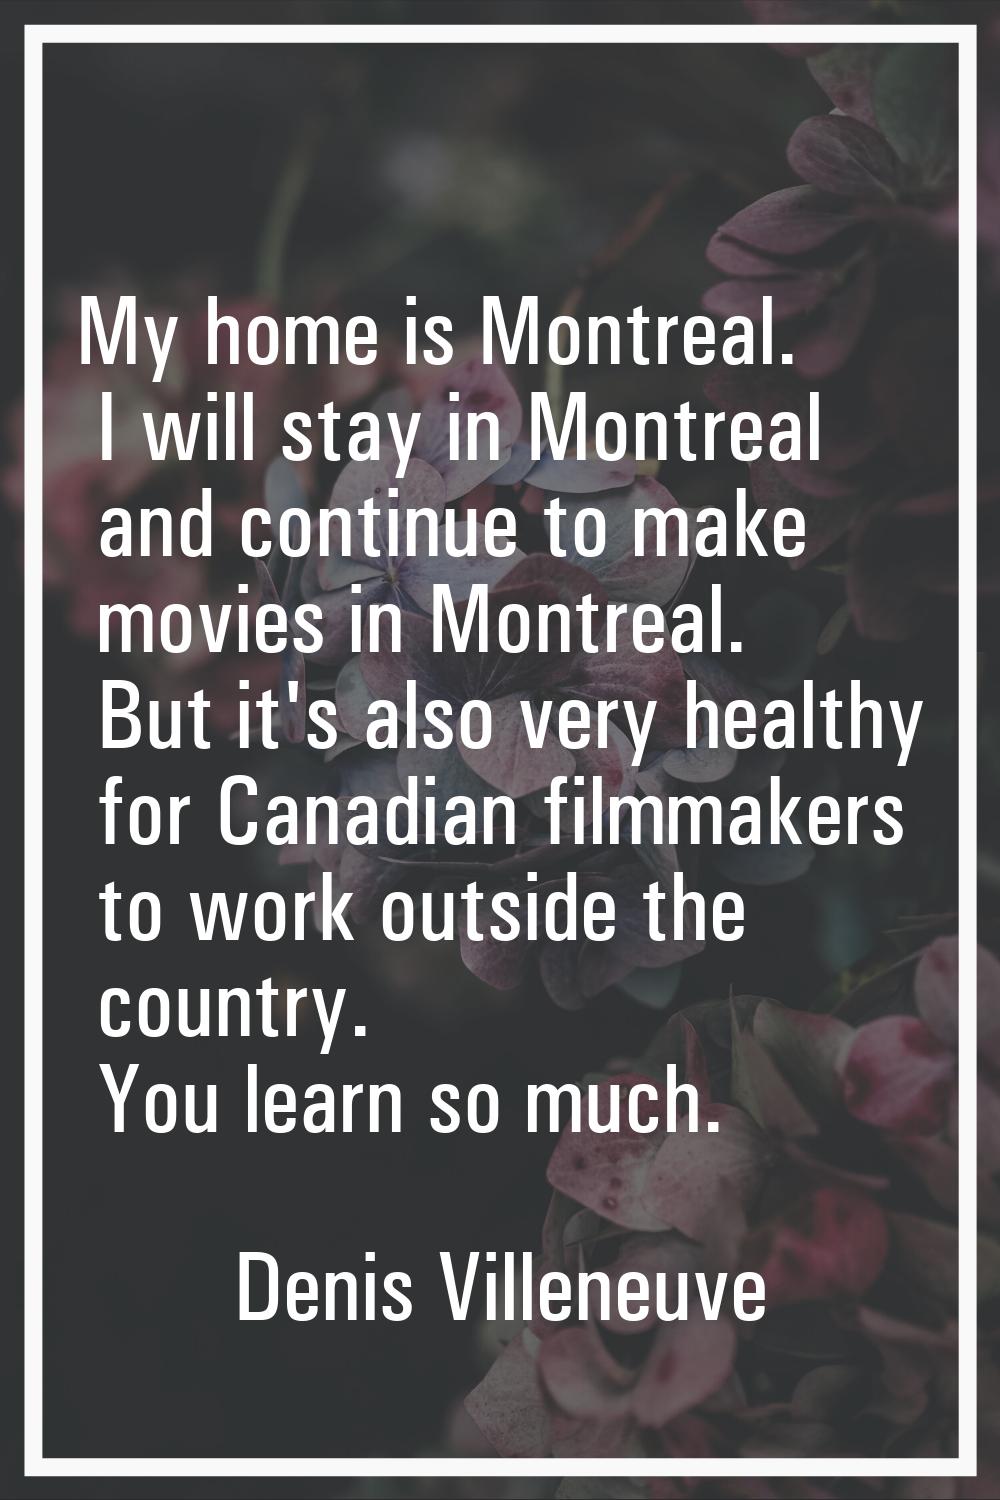 My home is Montreal. I will stay in Montreal and continue to make movies in Montreal. But it's also